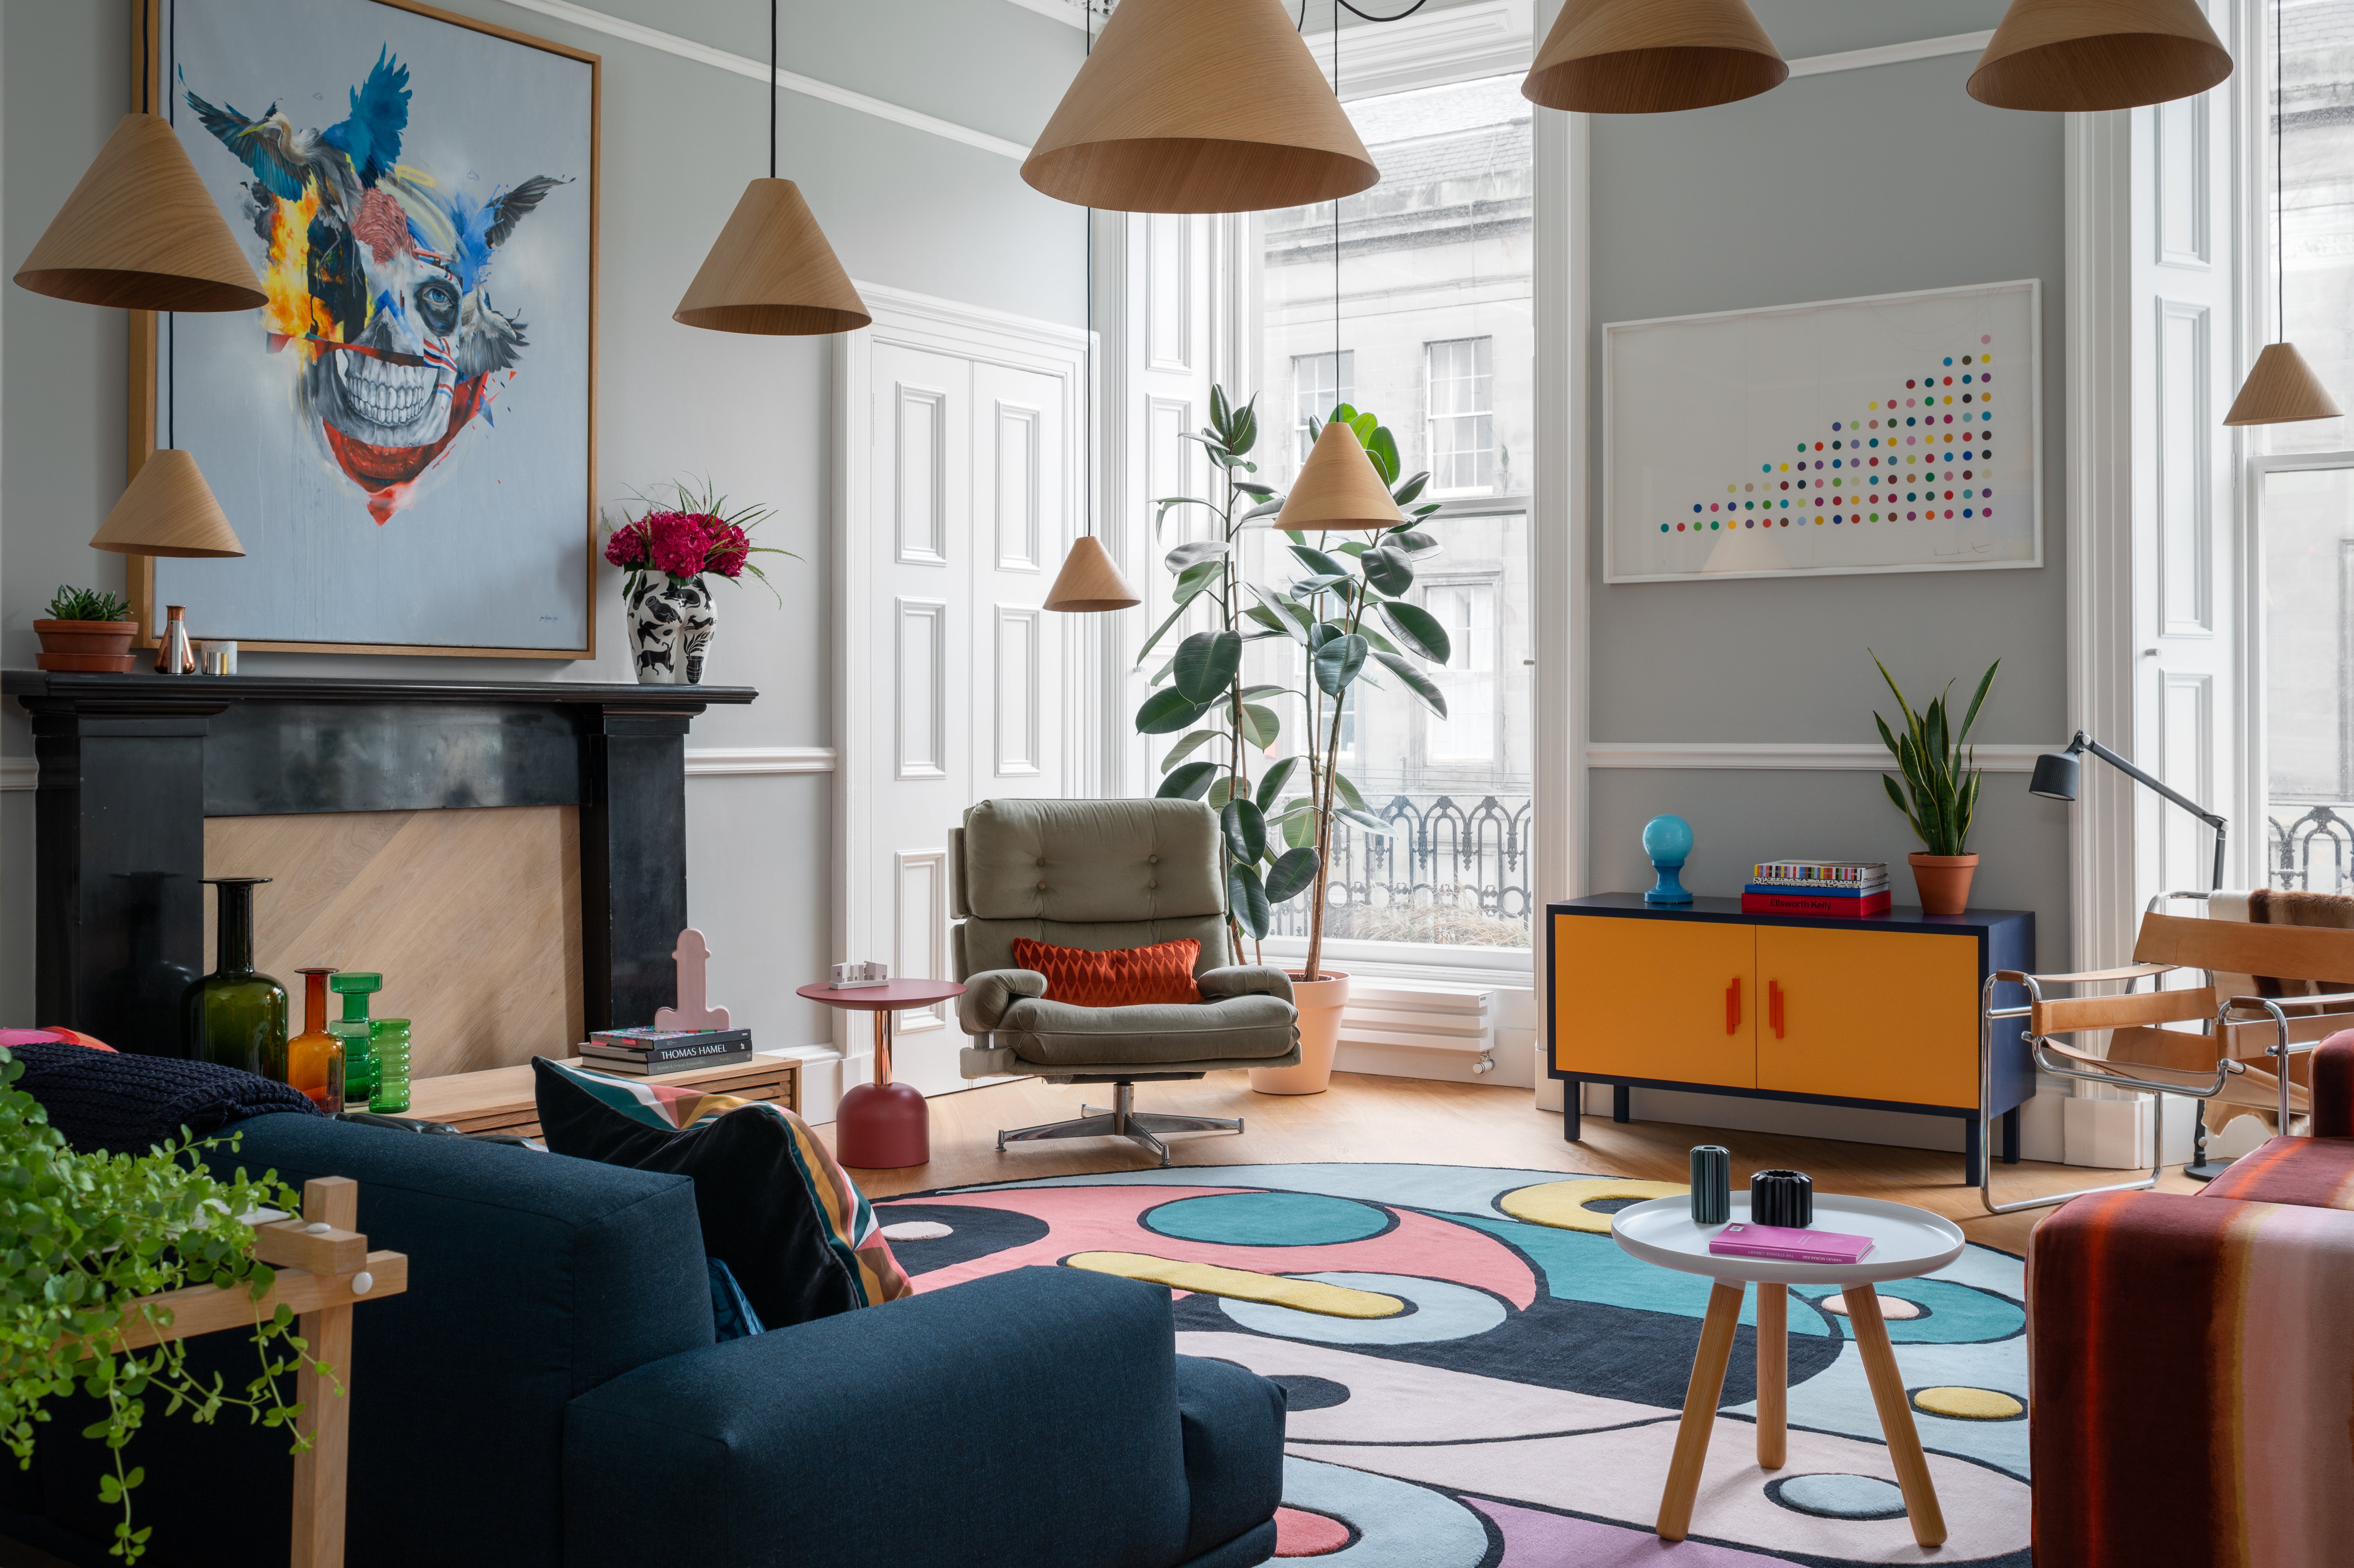 A stylish example of a solo living room replete with colour